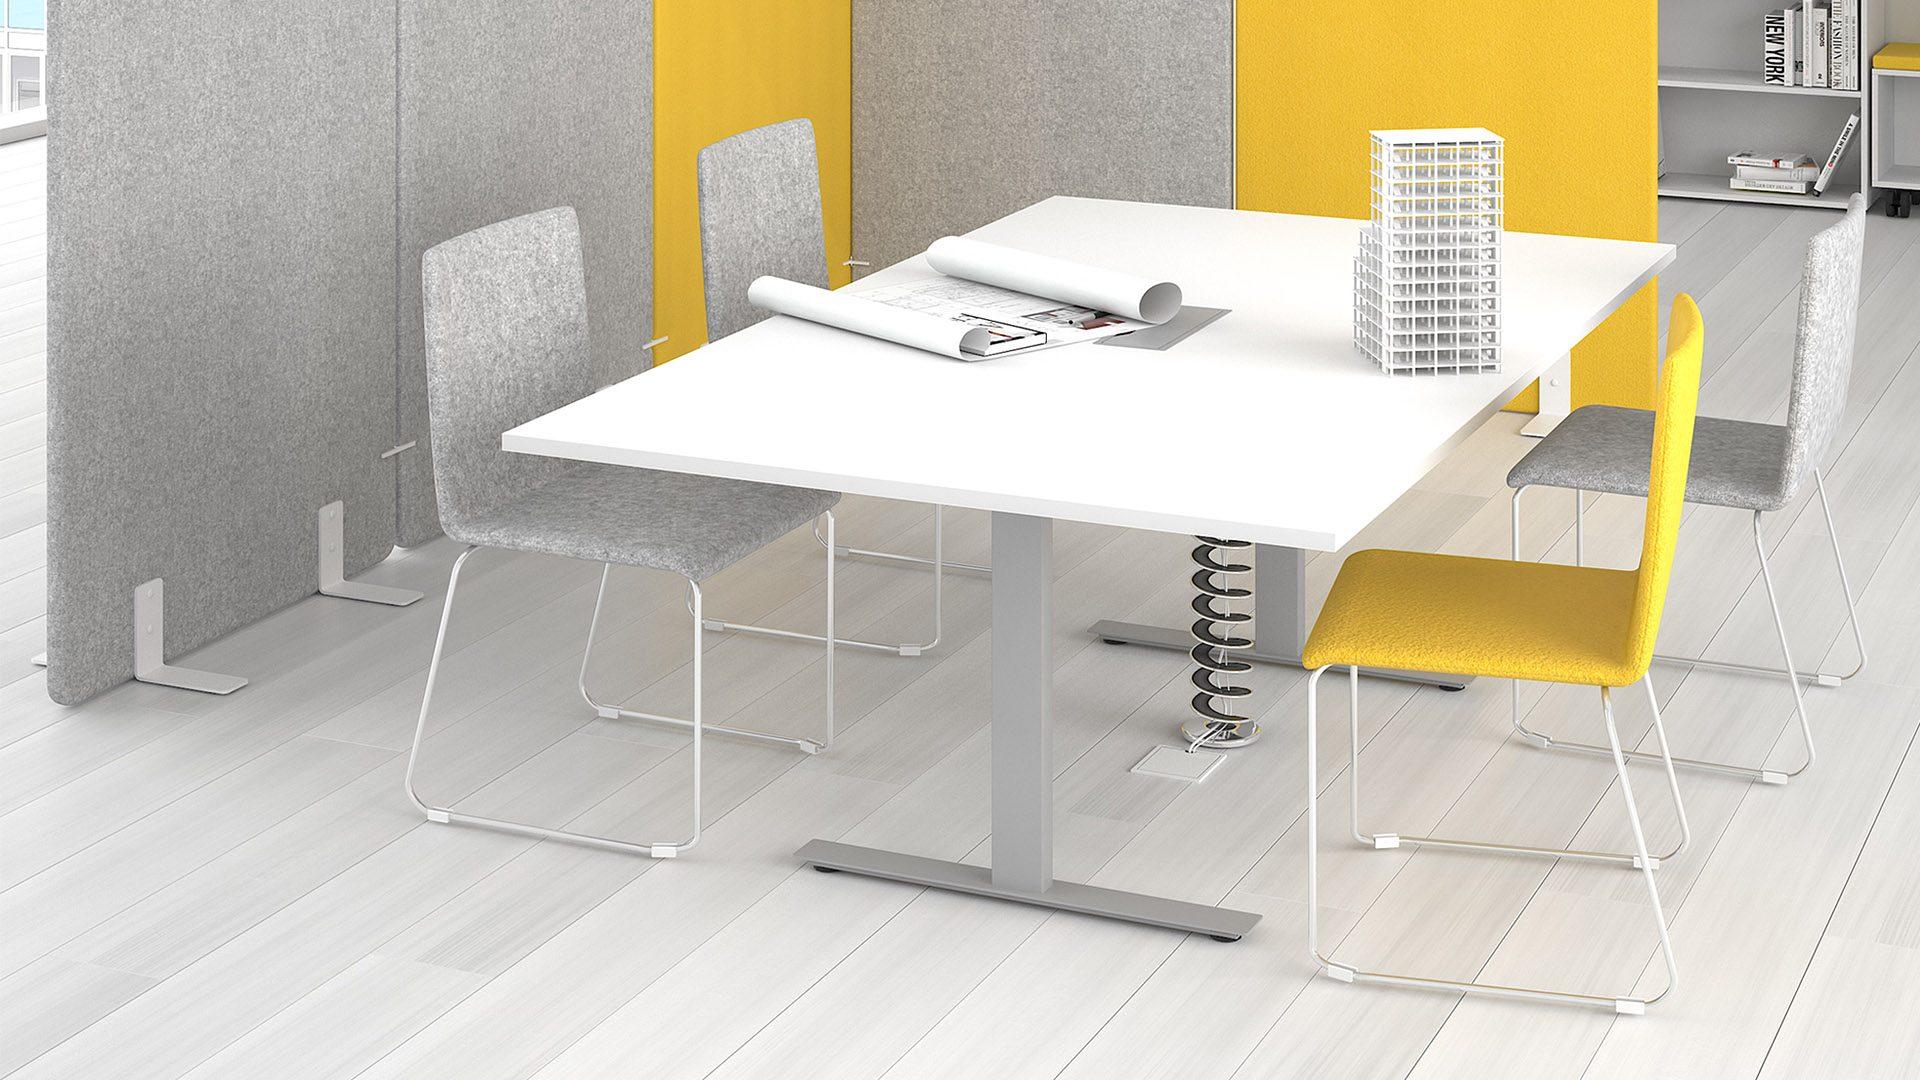 T-easy 6 seat meeting table with white top and silver legs